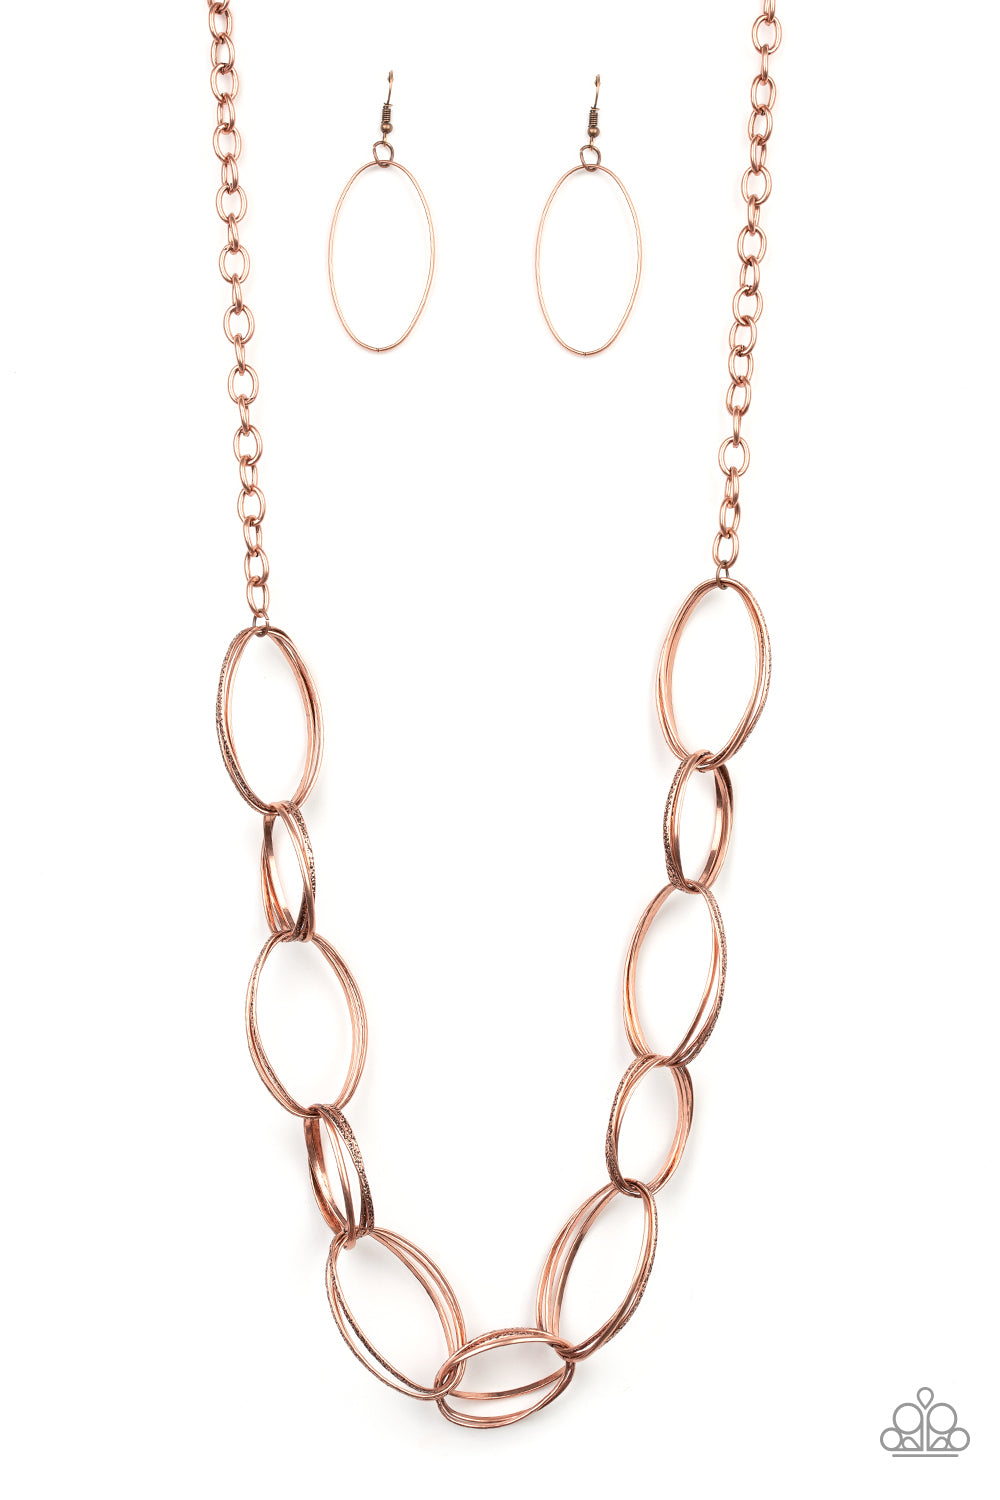 Ring Bling Copper Necklace - Paparazzi